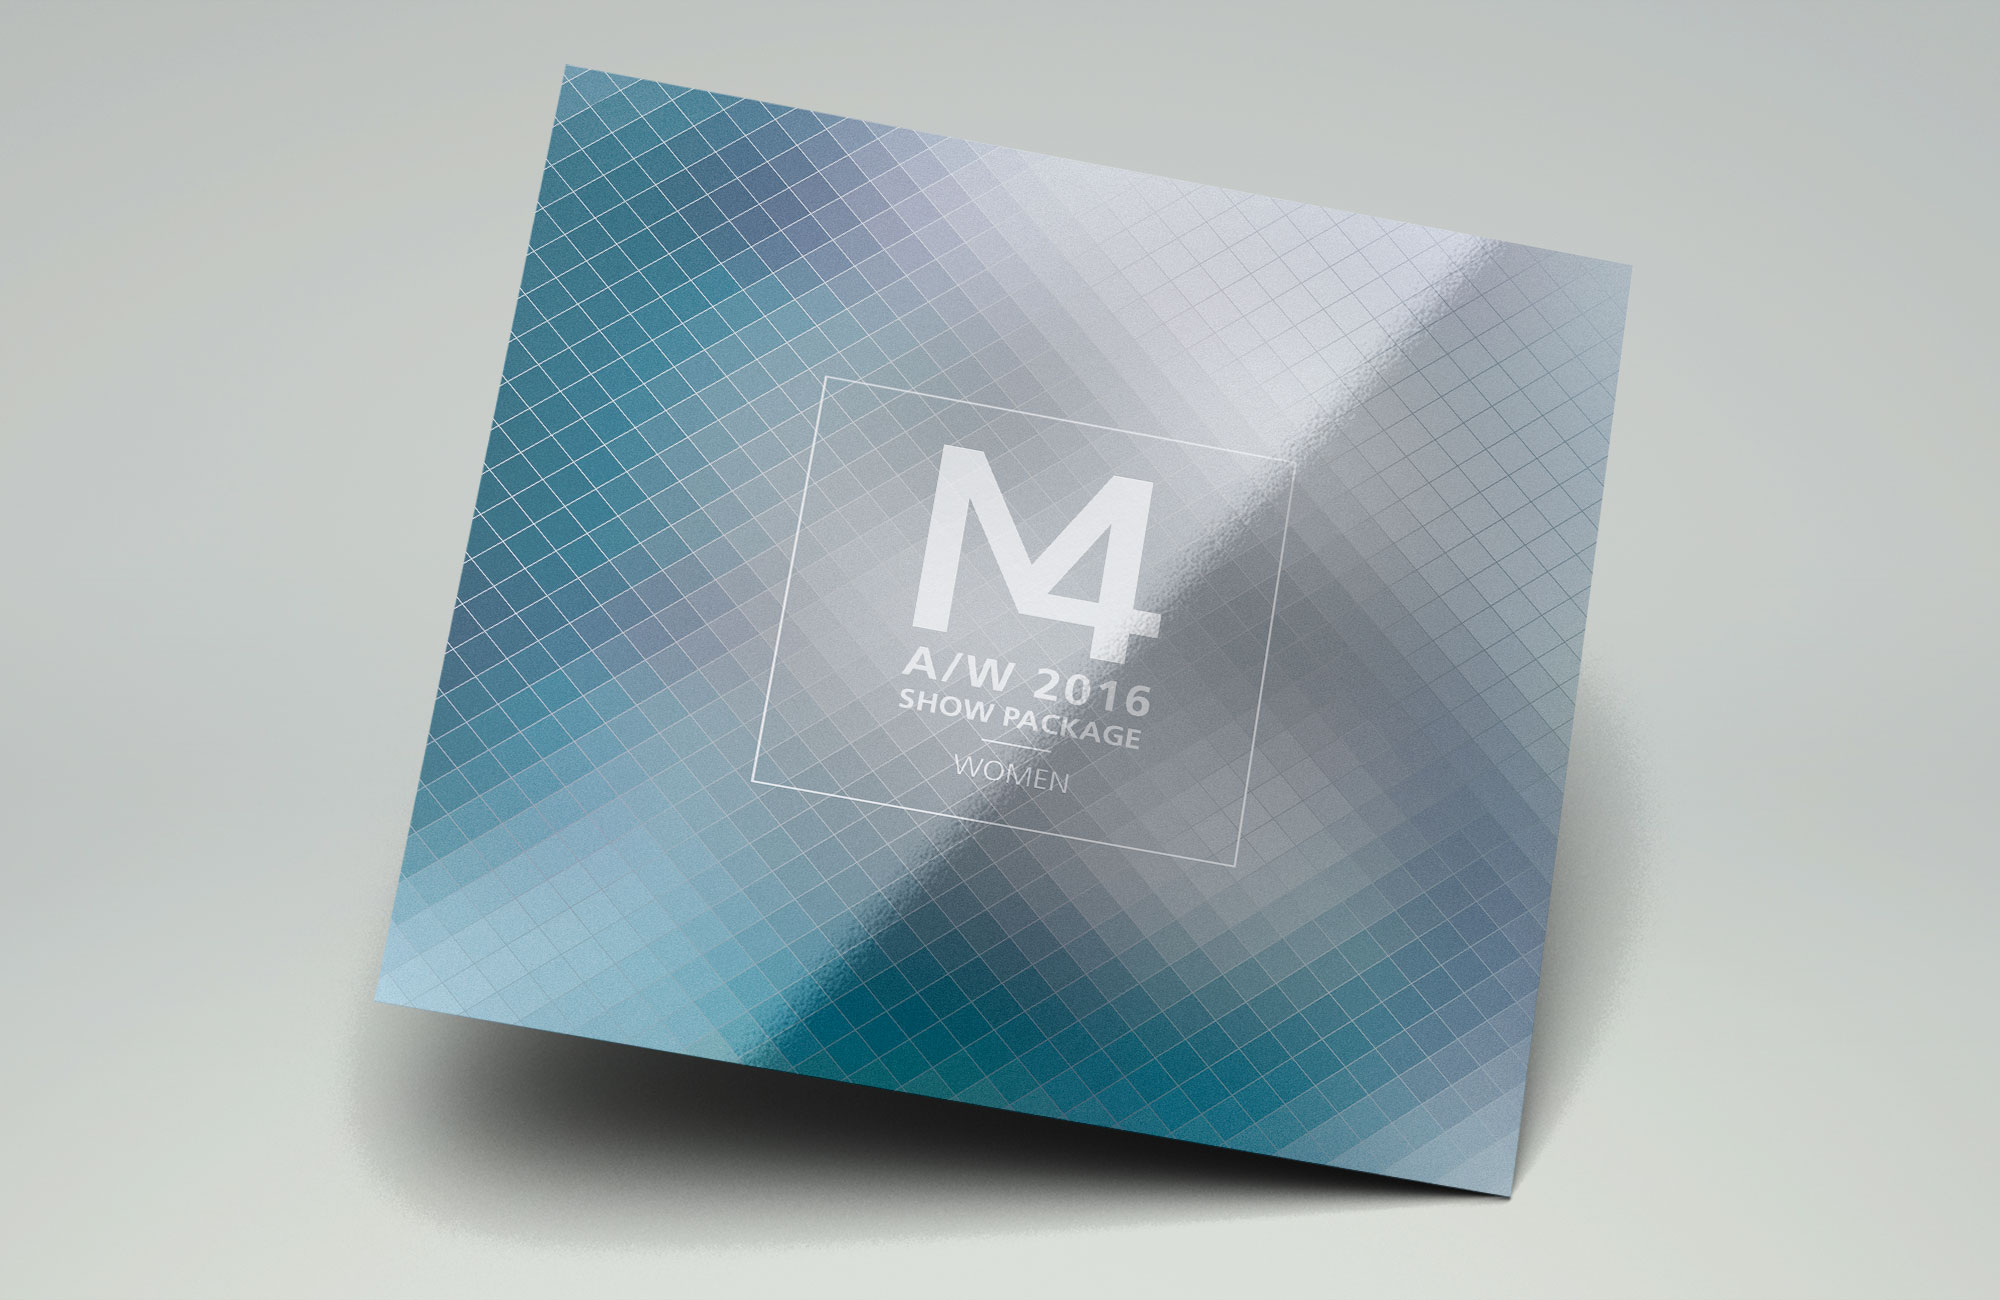 M4 Show Package Autumn/Winter 2016